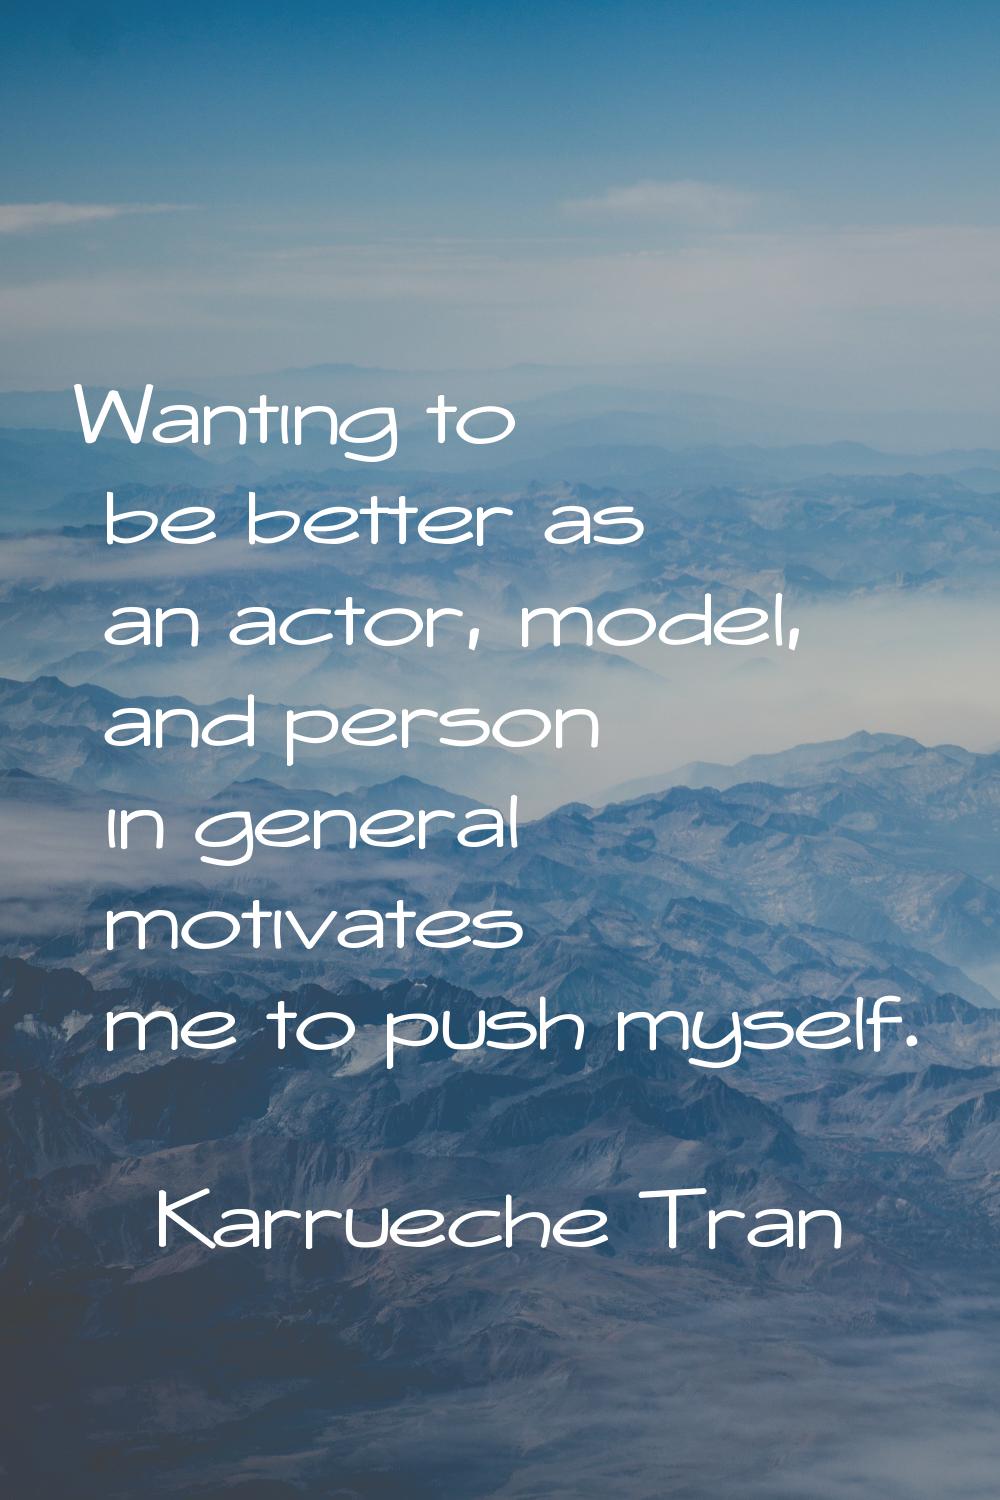 Wanting to be better as an actor, model, and person in general motivates me to push myself.